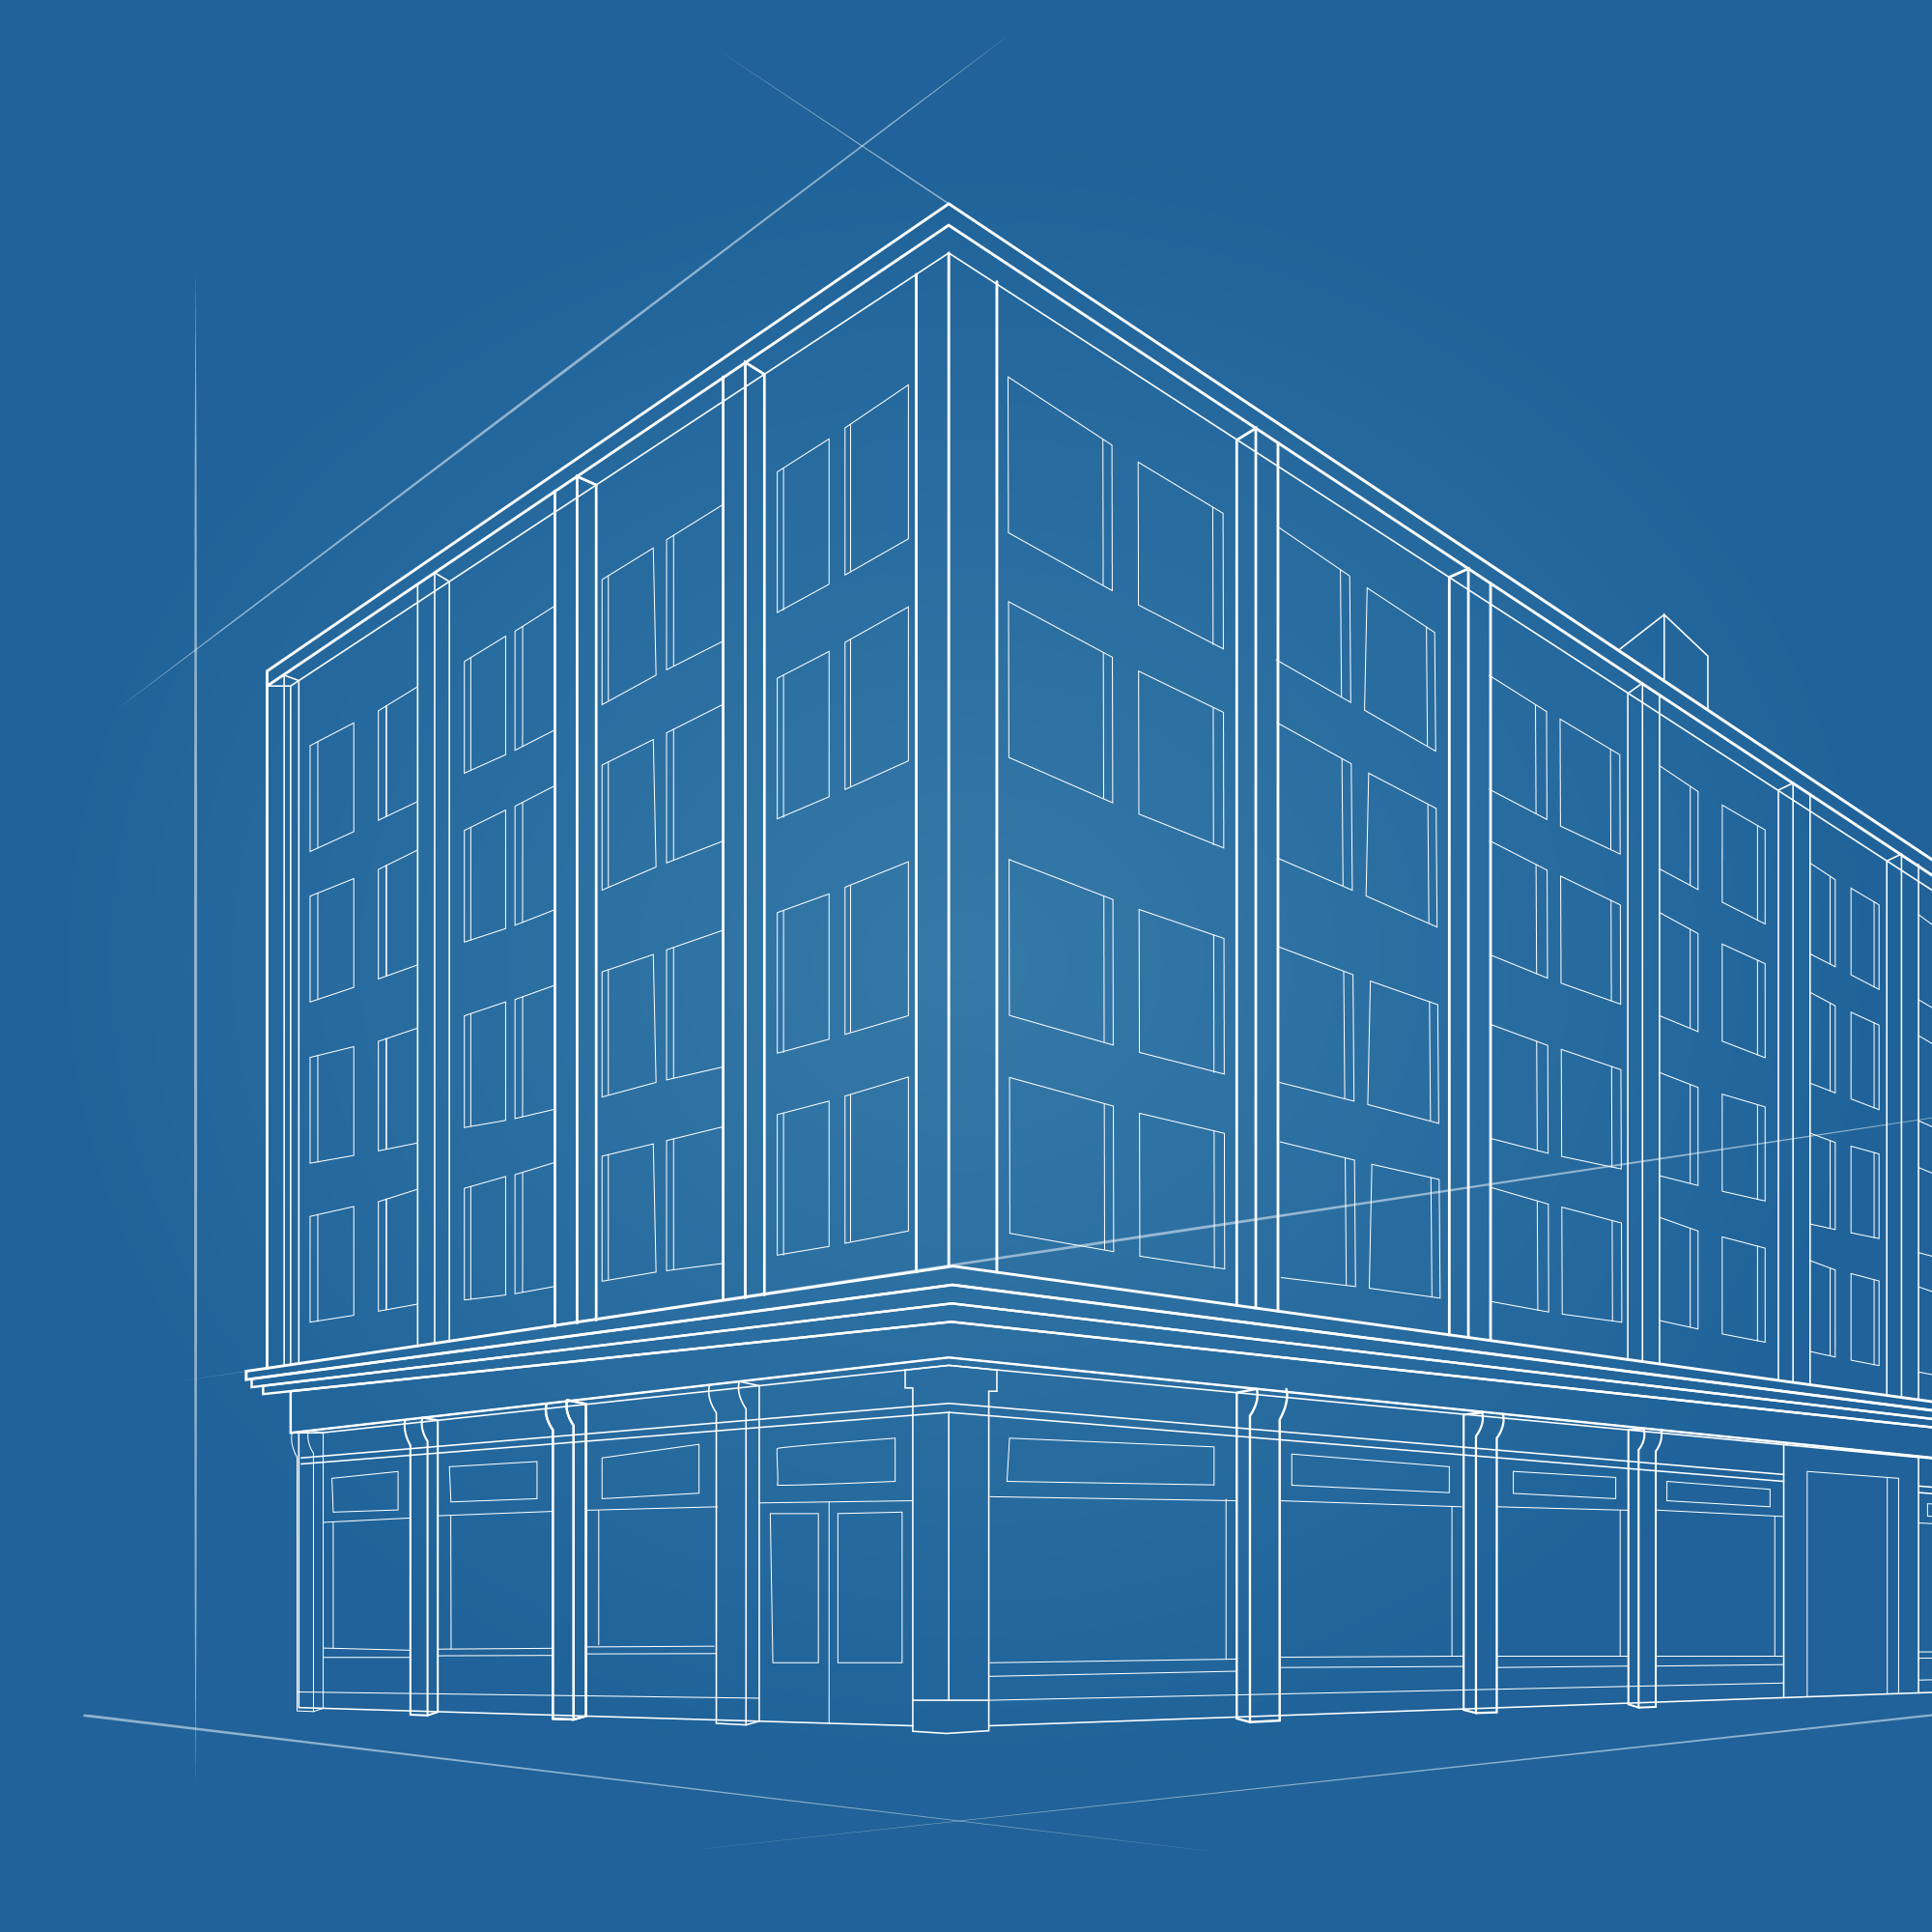 Blueprint of a building. Symbolizing development and real estate services.